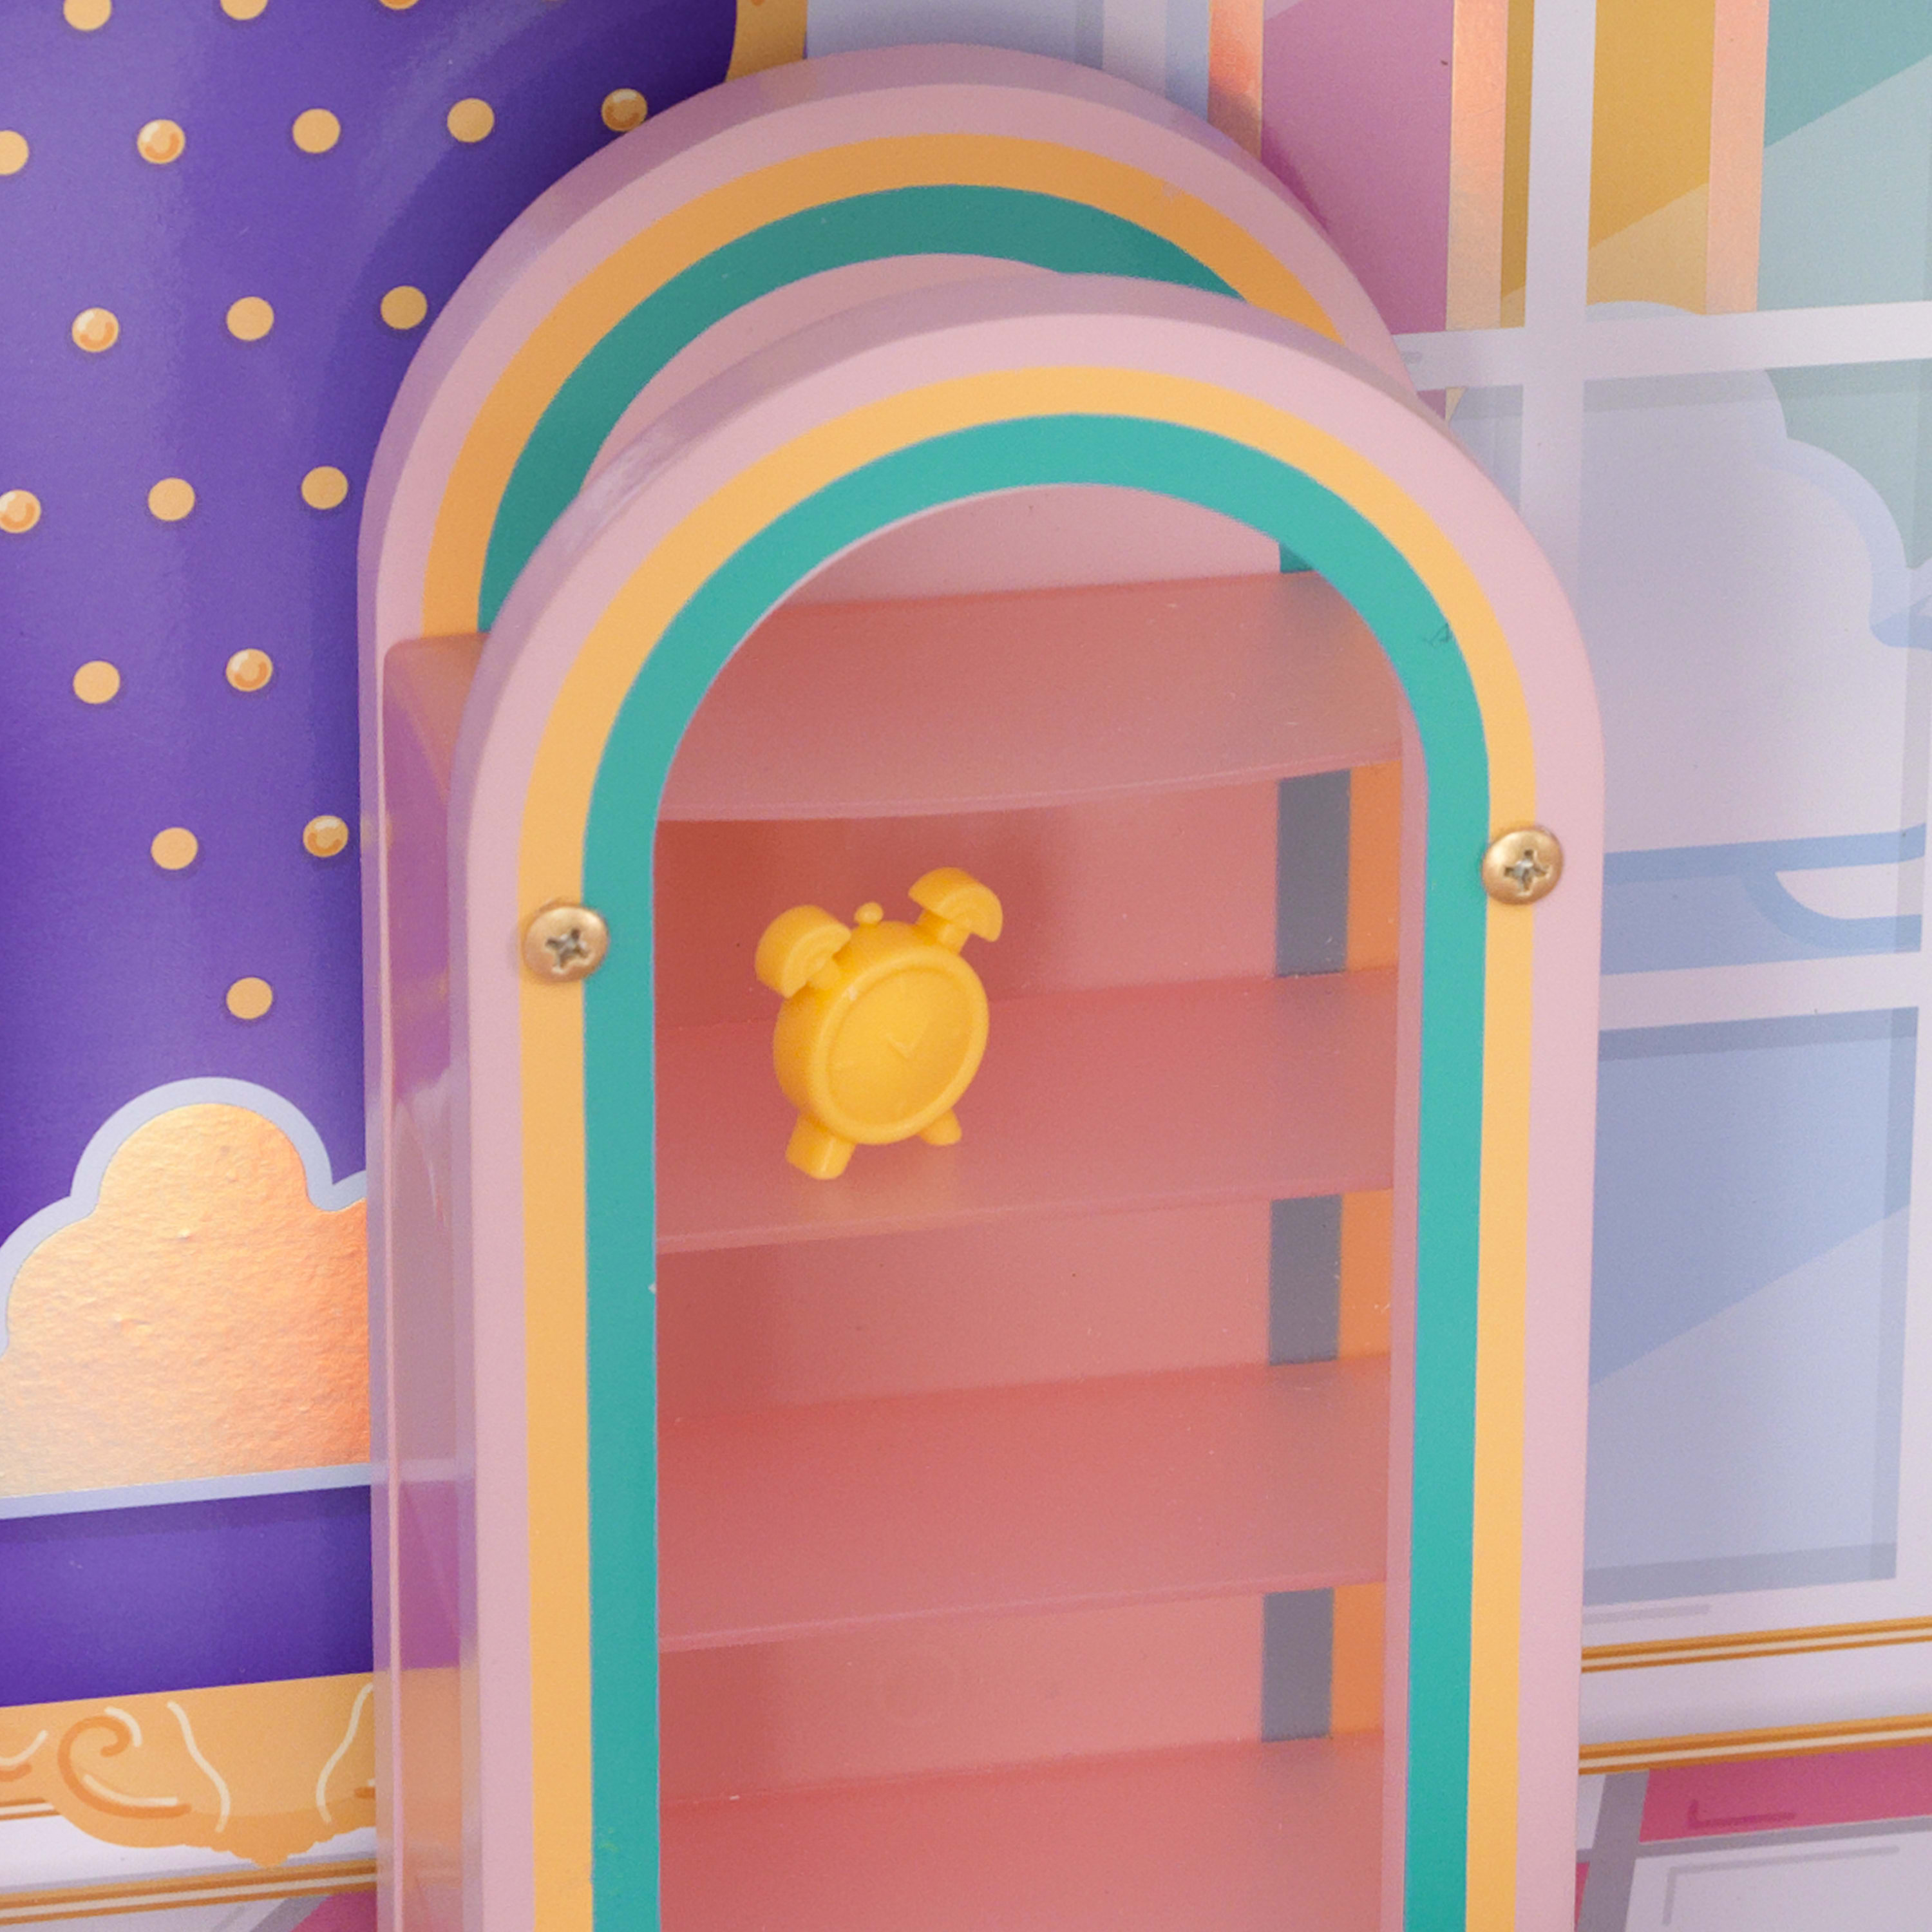 KidKraft Rainbow Dreamers Cloud Bedroom Dollhouse Furniture with 8 Pieces - image 4 of 6